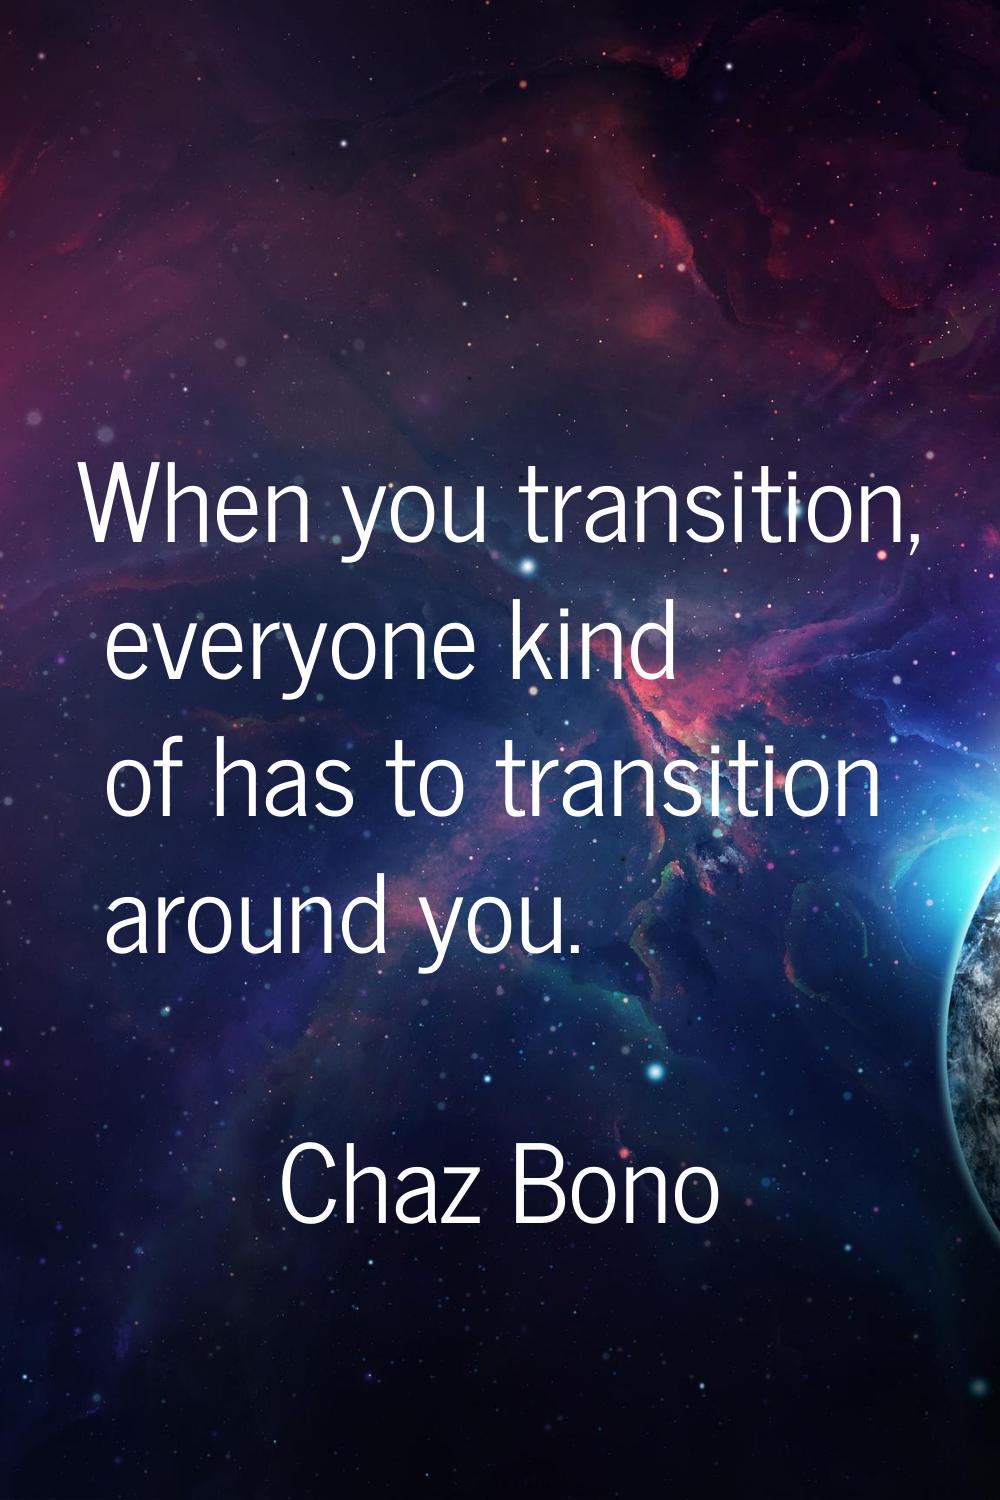 When you transition, everyone kind of has to transition around you.